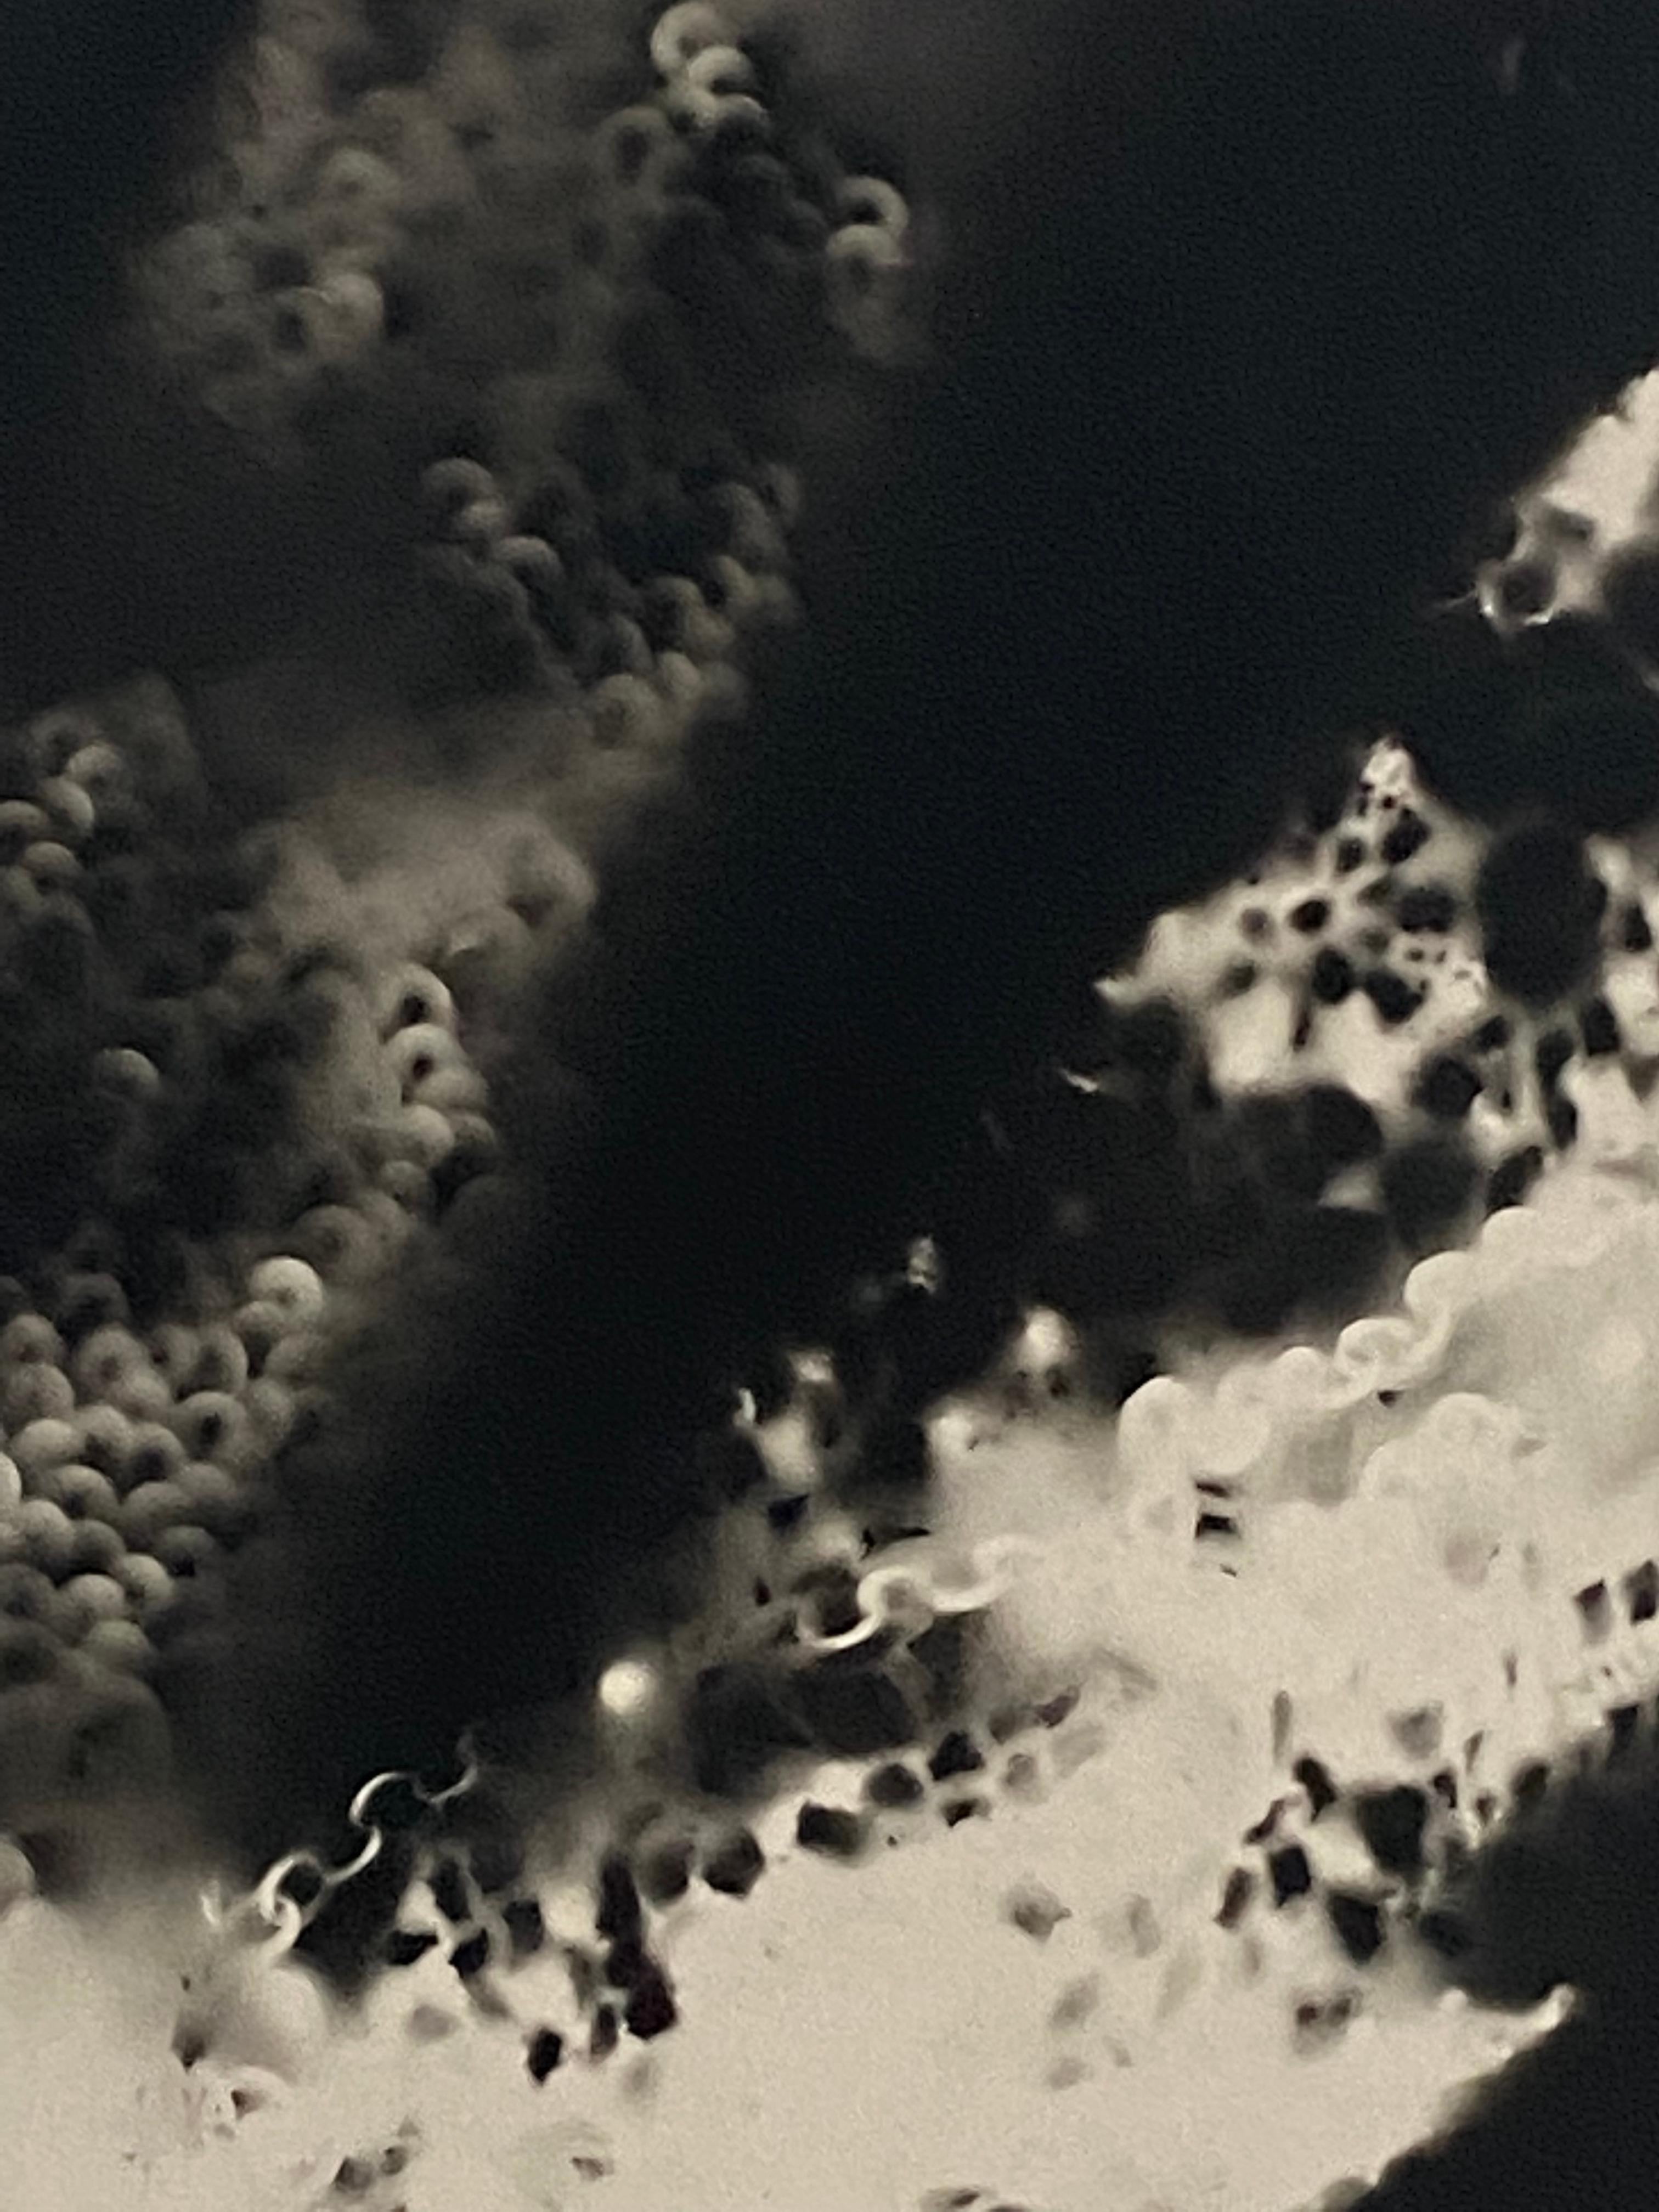 Unique silver gelatin print (photogram made sans enlarger); from my 